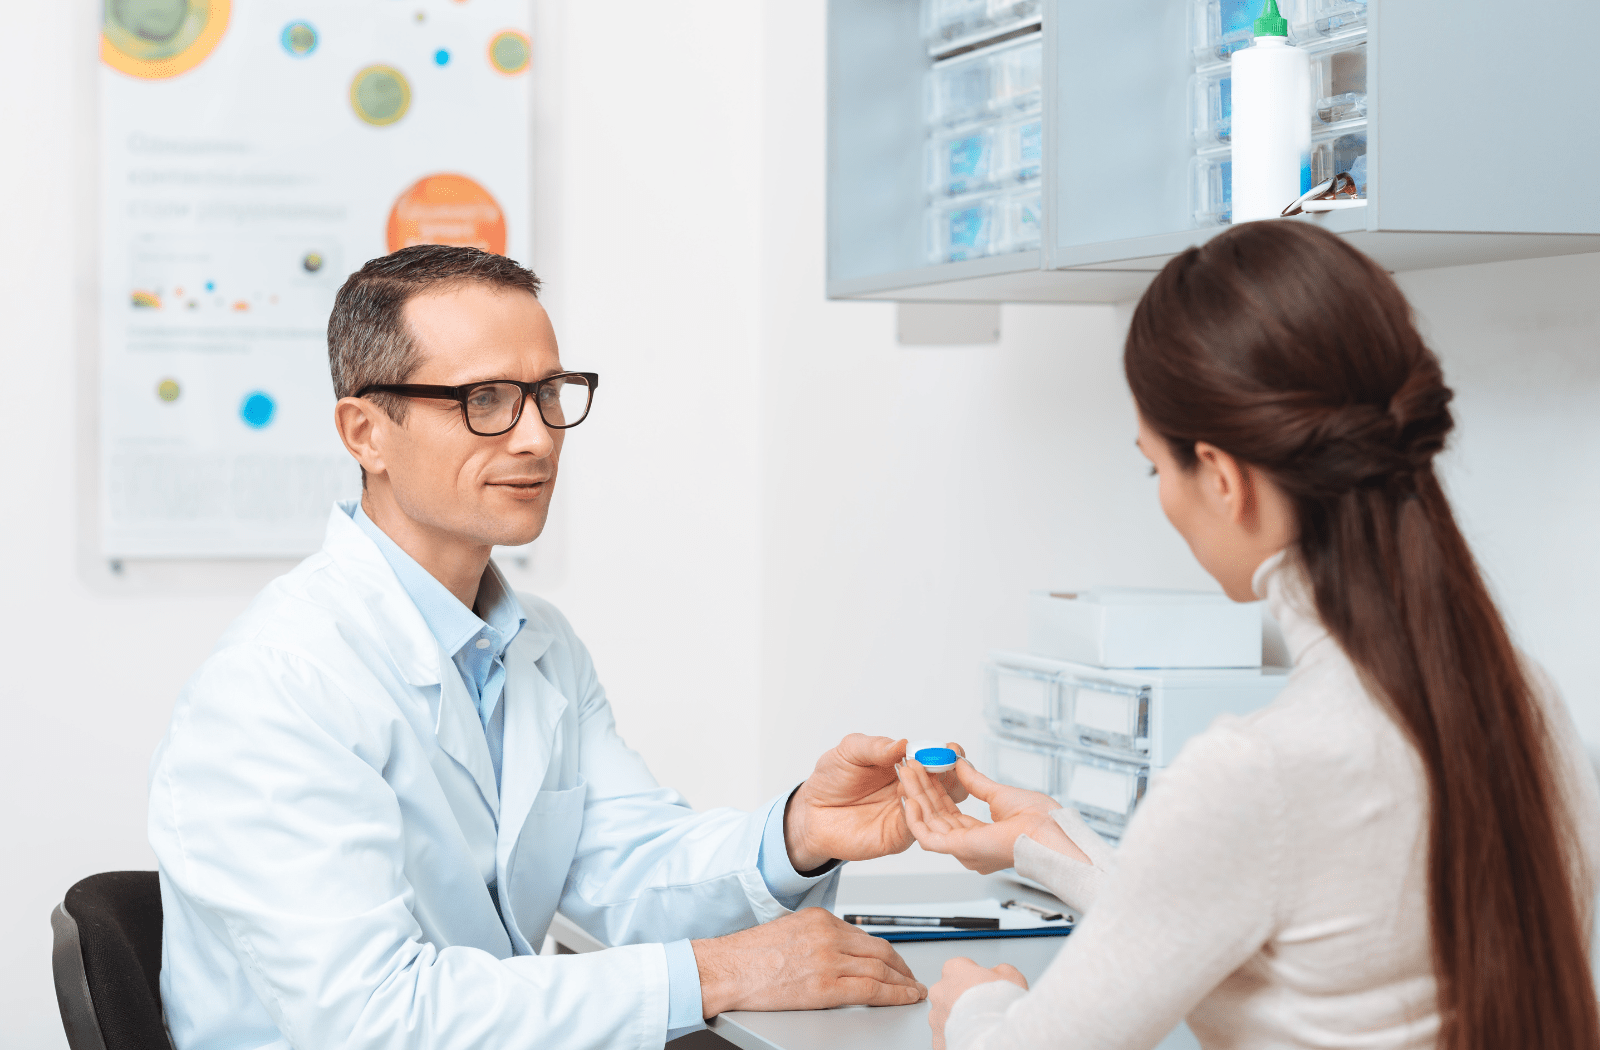 A male optometrist speaks to a female patient about wearing contact lenses while handing her a case